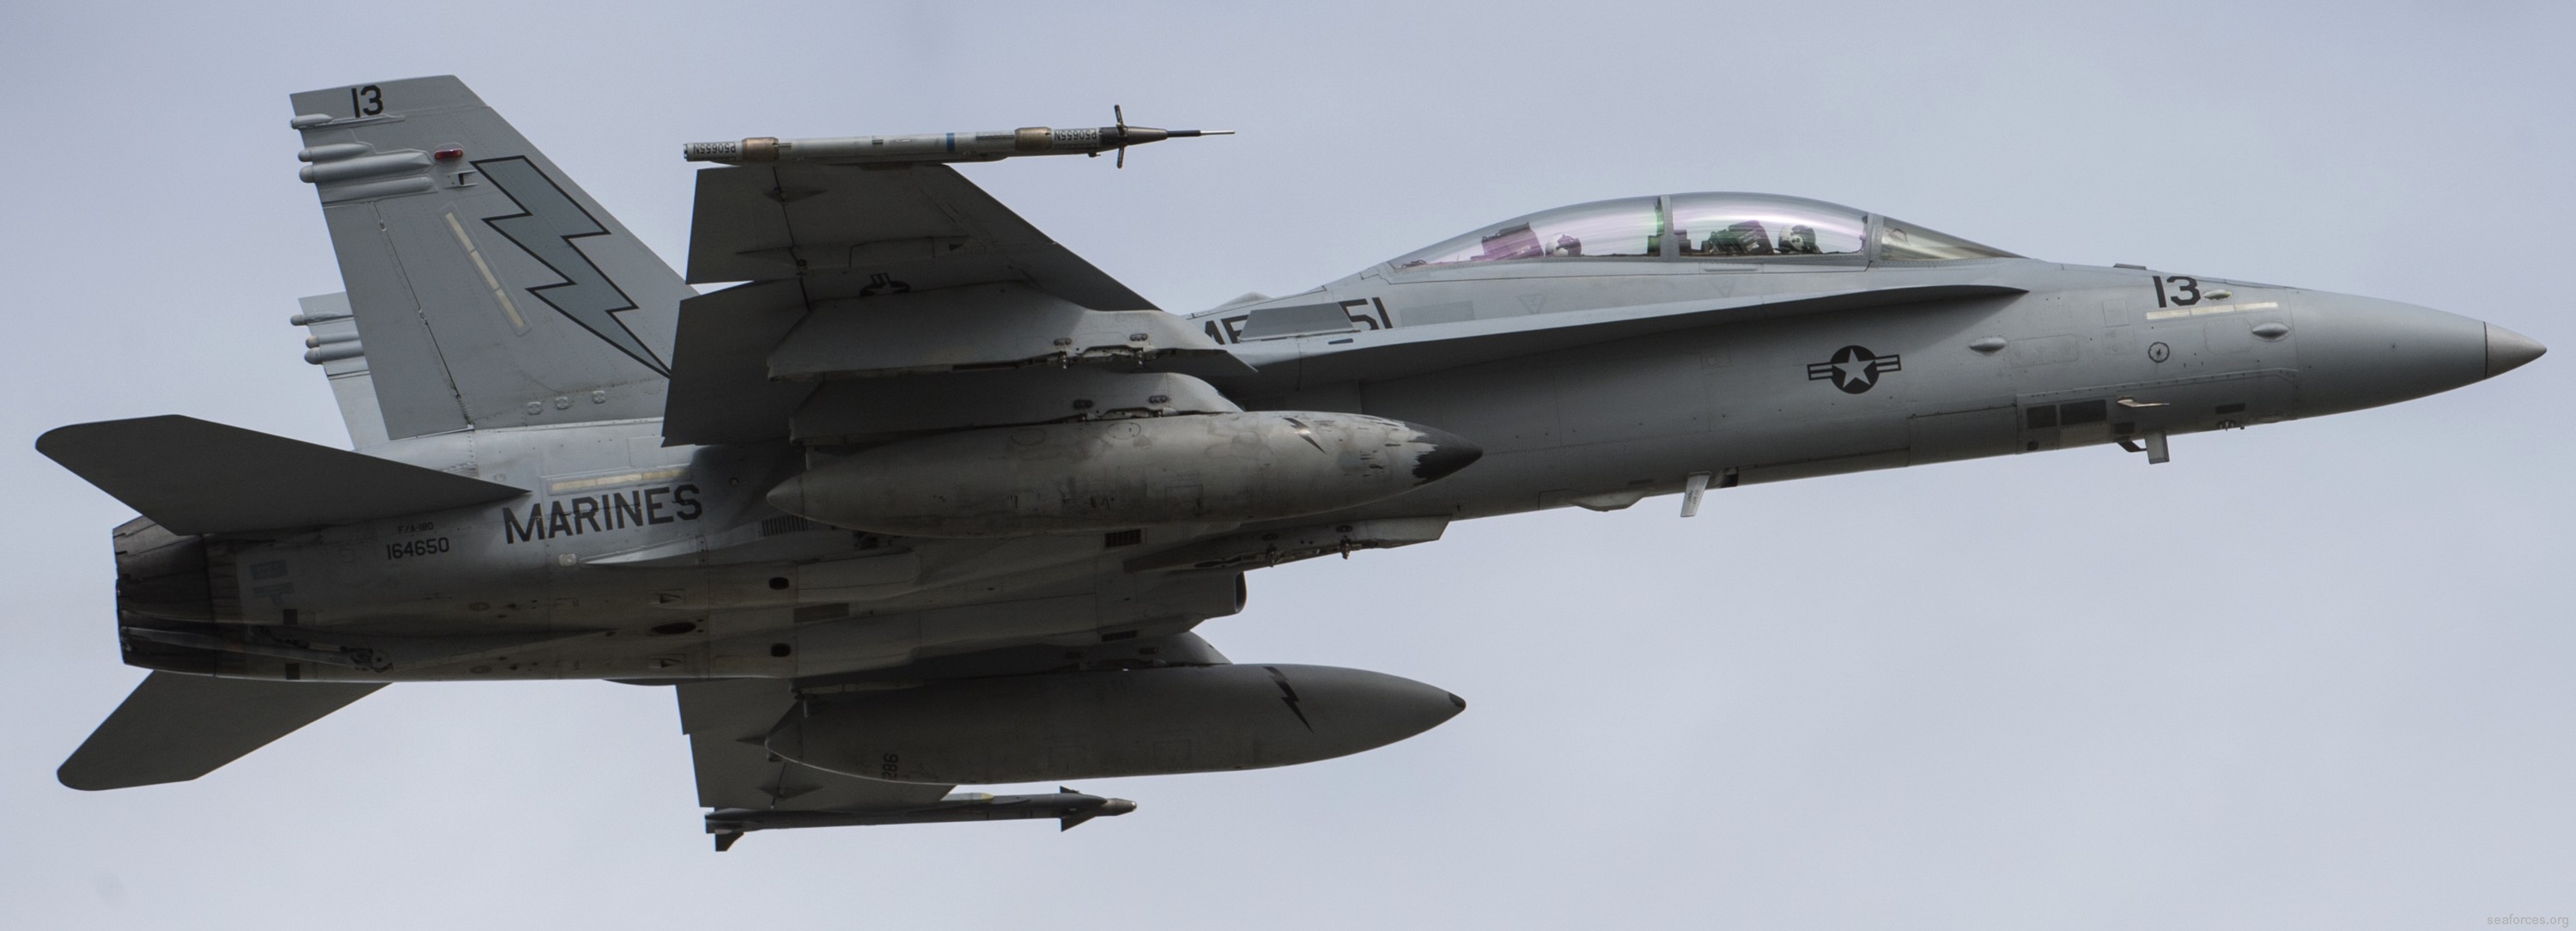 vmfa-251 thunderbolts marine fighter attack squadron f/a-18d hornet 113 exercise red flag alaska 17-2